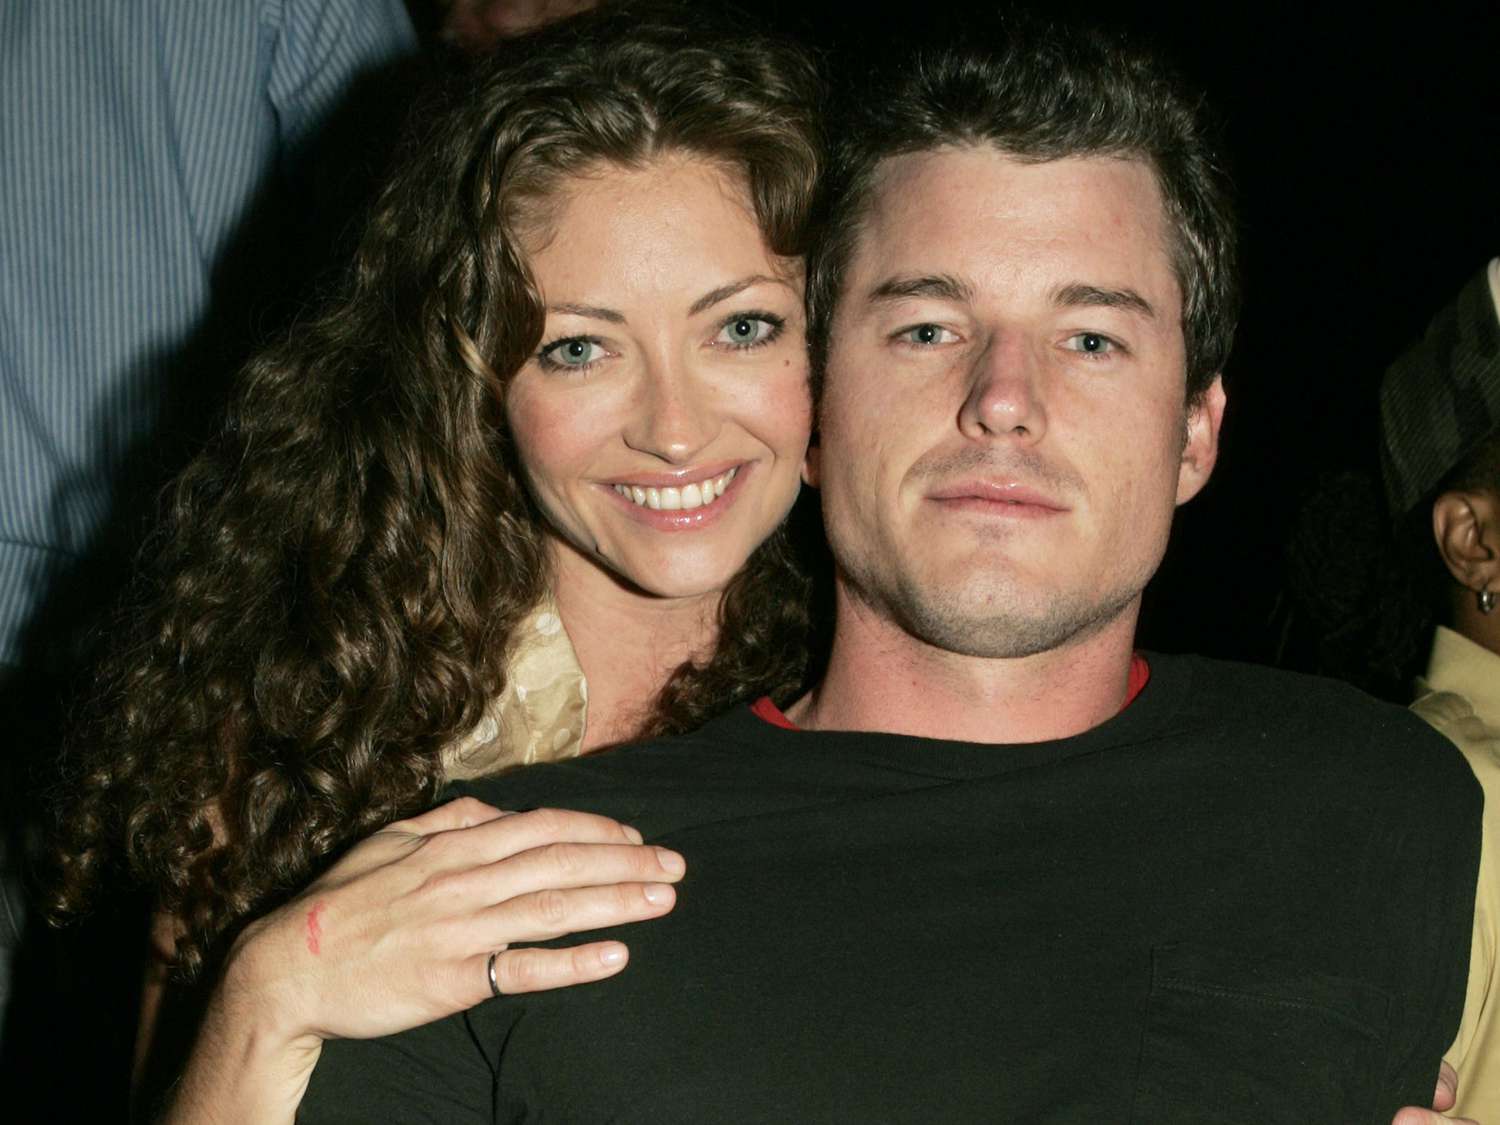 chris fabre share rebecca gayheart leaked video photos